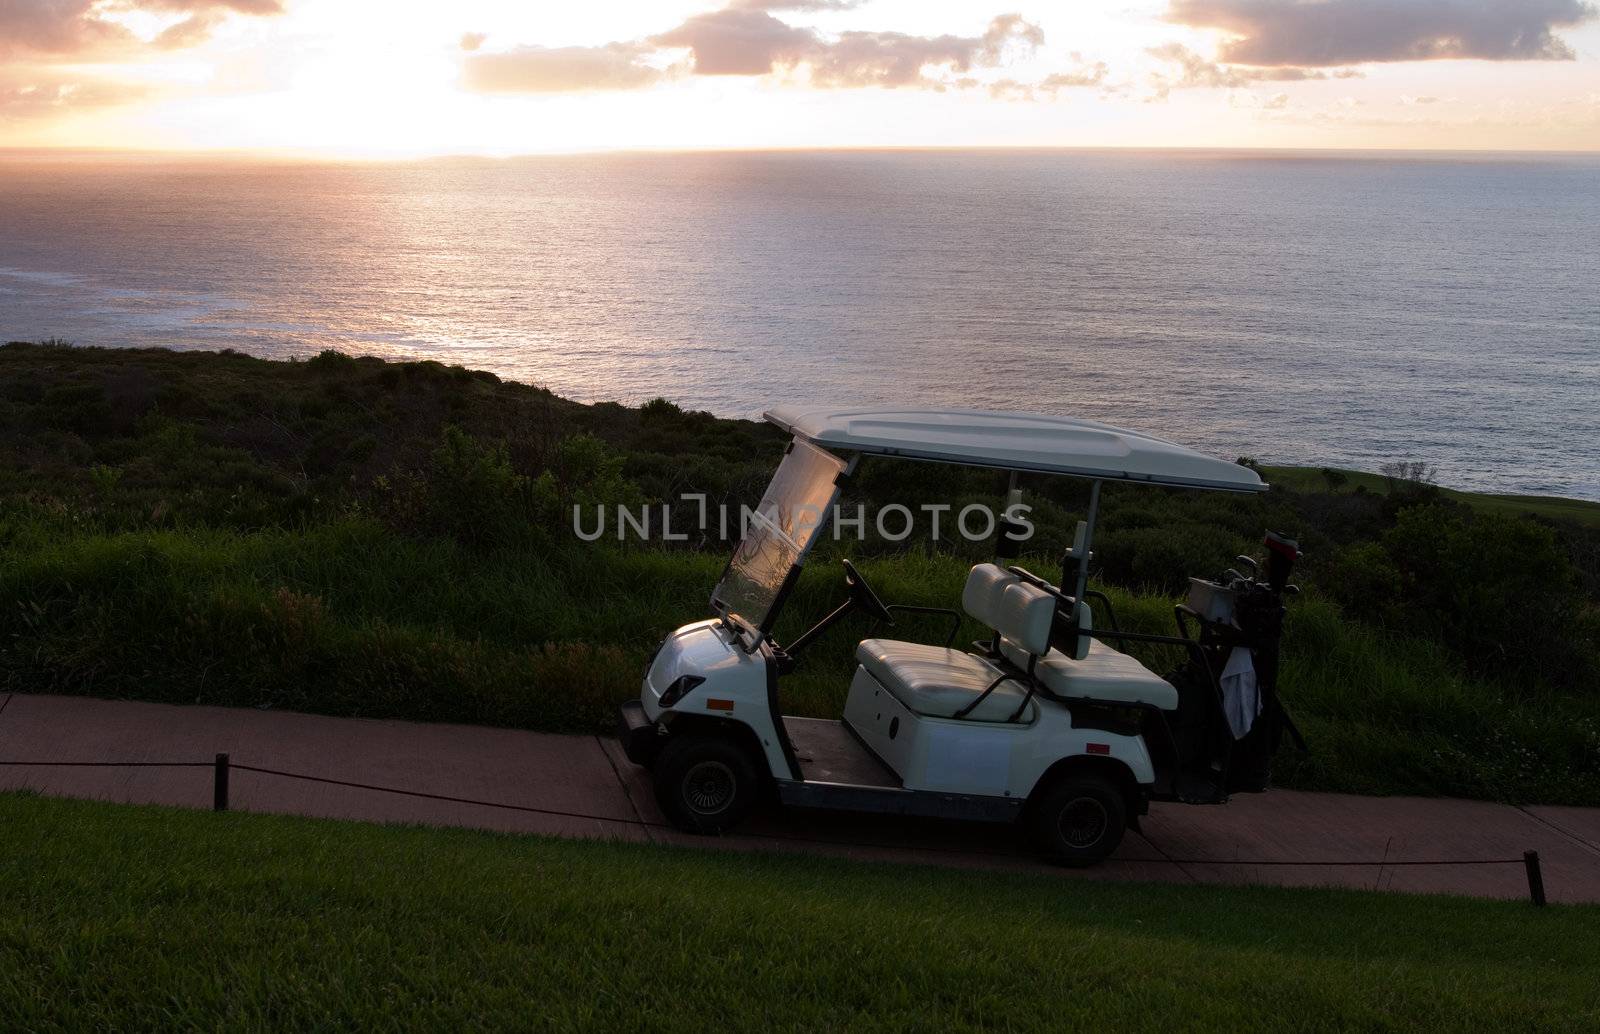 Golf cart at beach or seaside holiday resort course